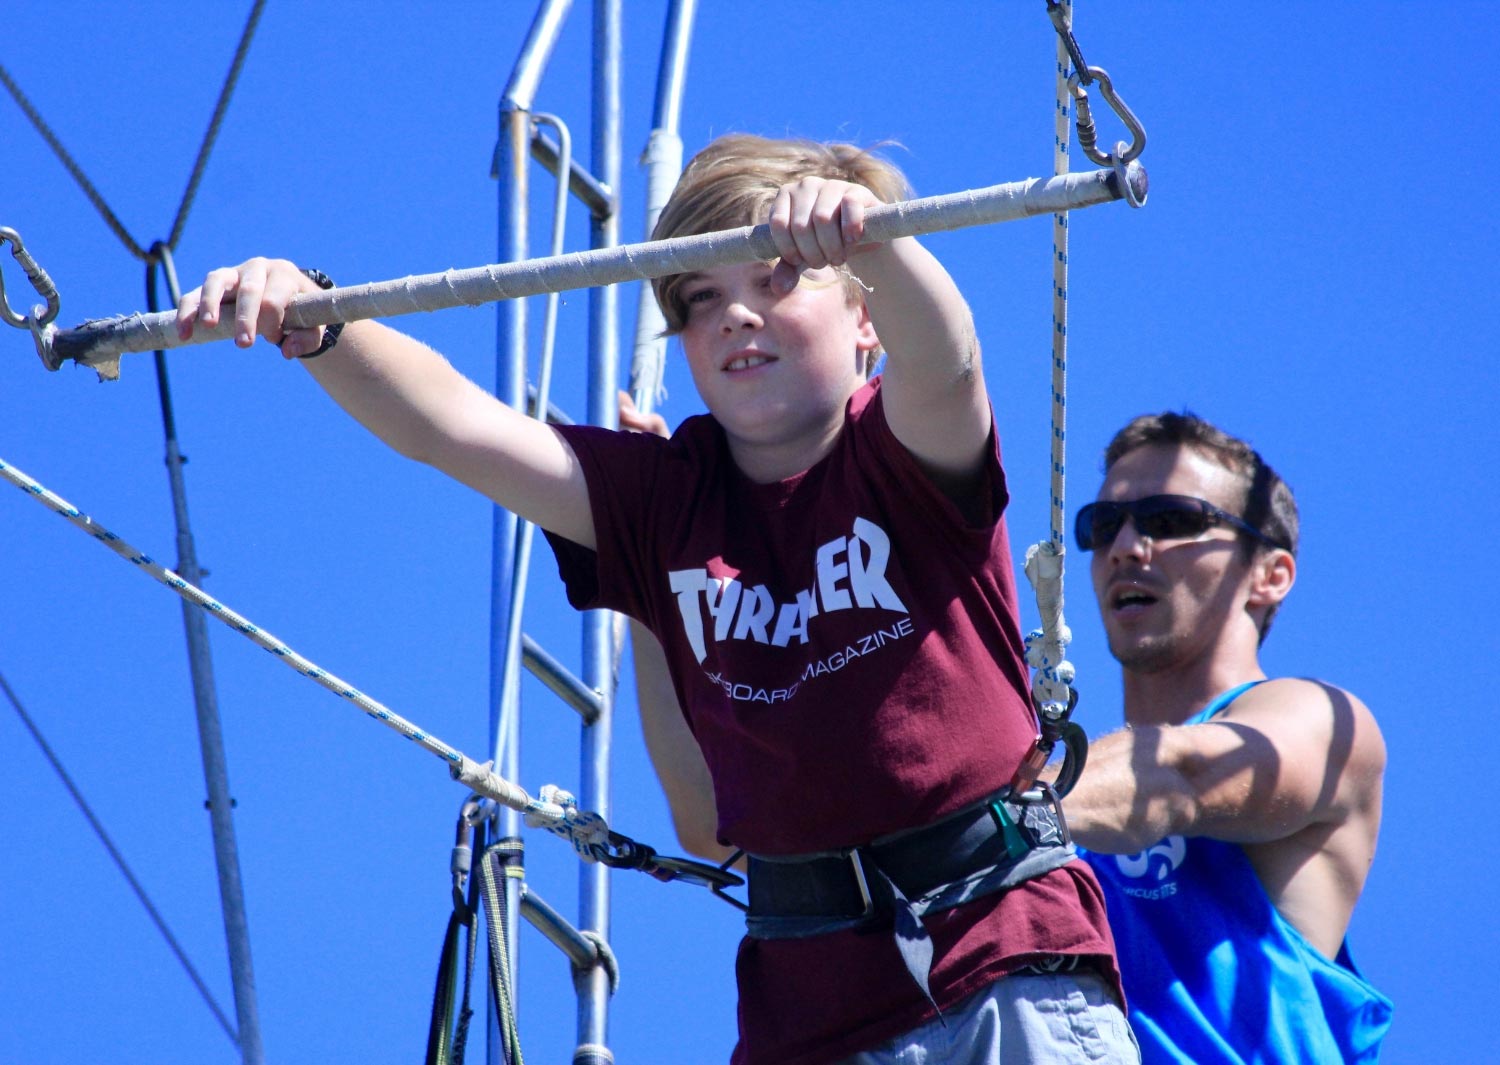 Child on the flying trapeze at Circus Arts Sydney